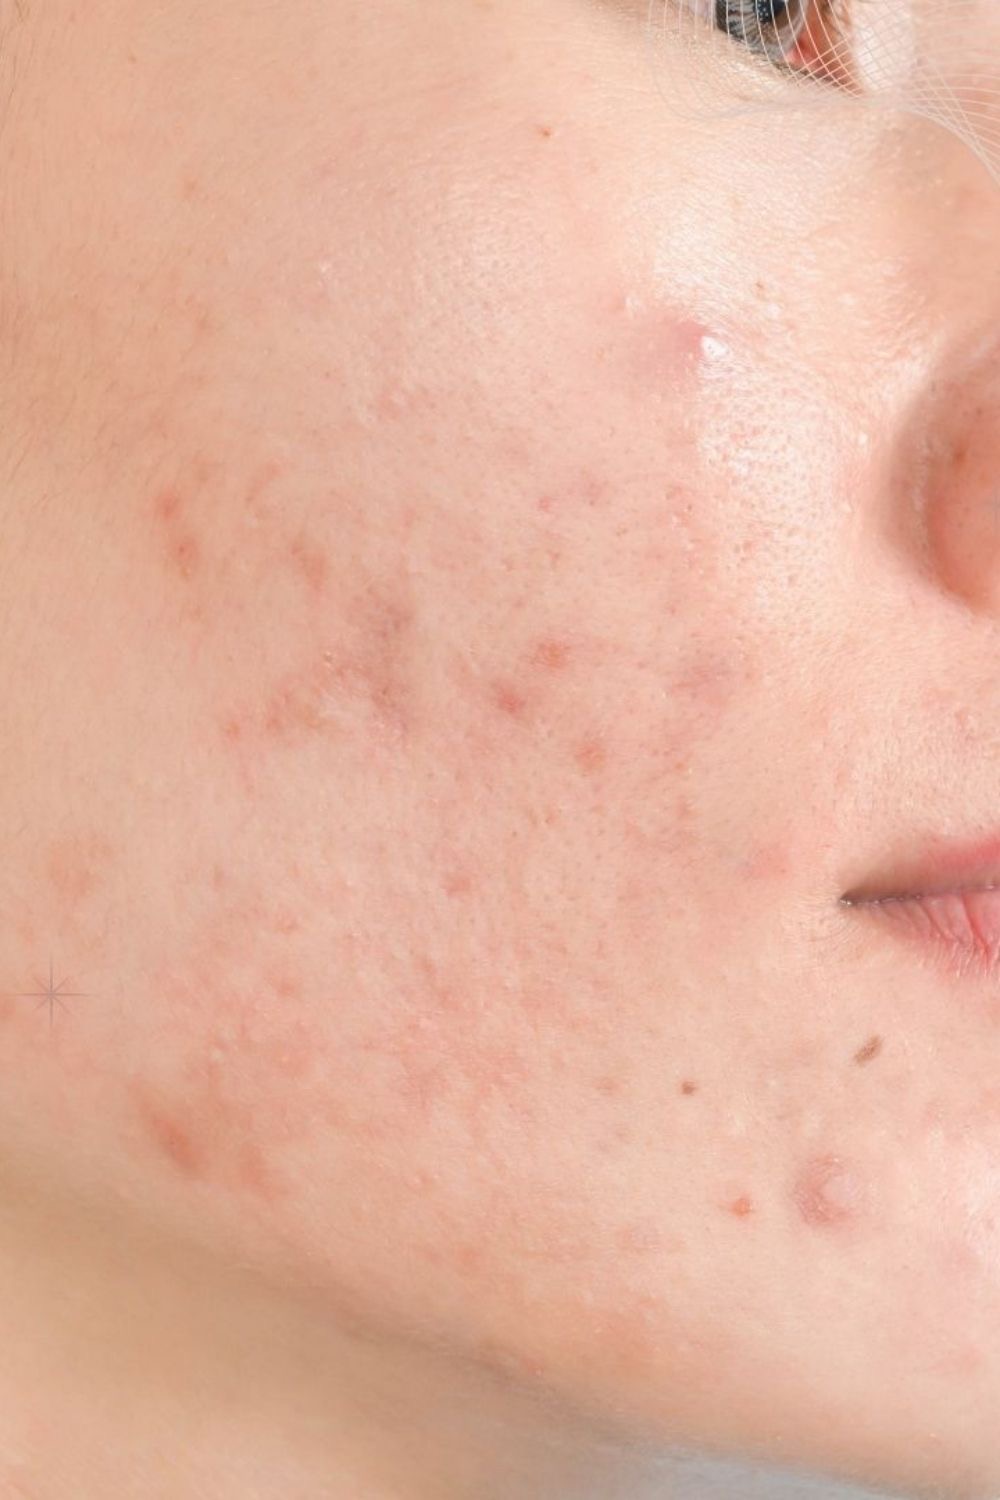 Fungal Acne Demystified 5 Crucial Aspects Causes Symptoms Diagnosis Effective Treatment 